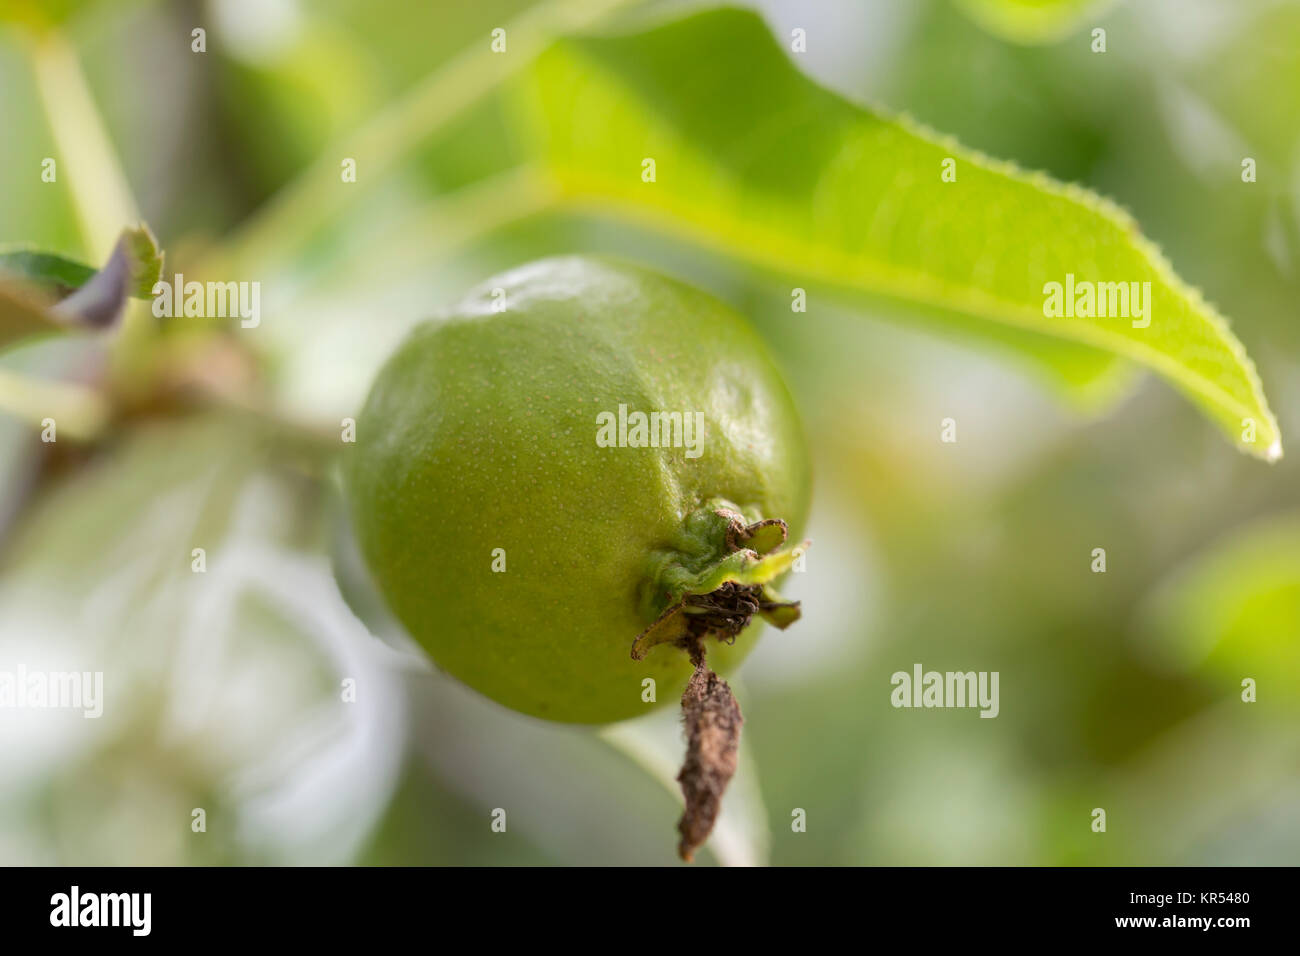 Ussurian Pear Close Up Stock Photo